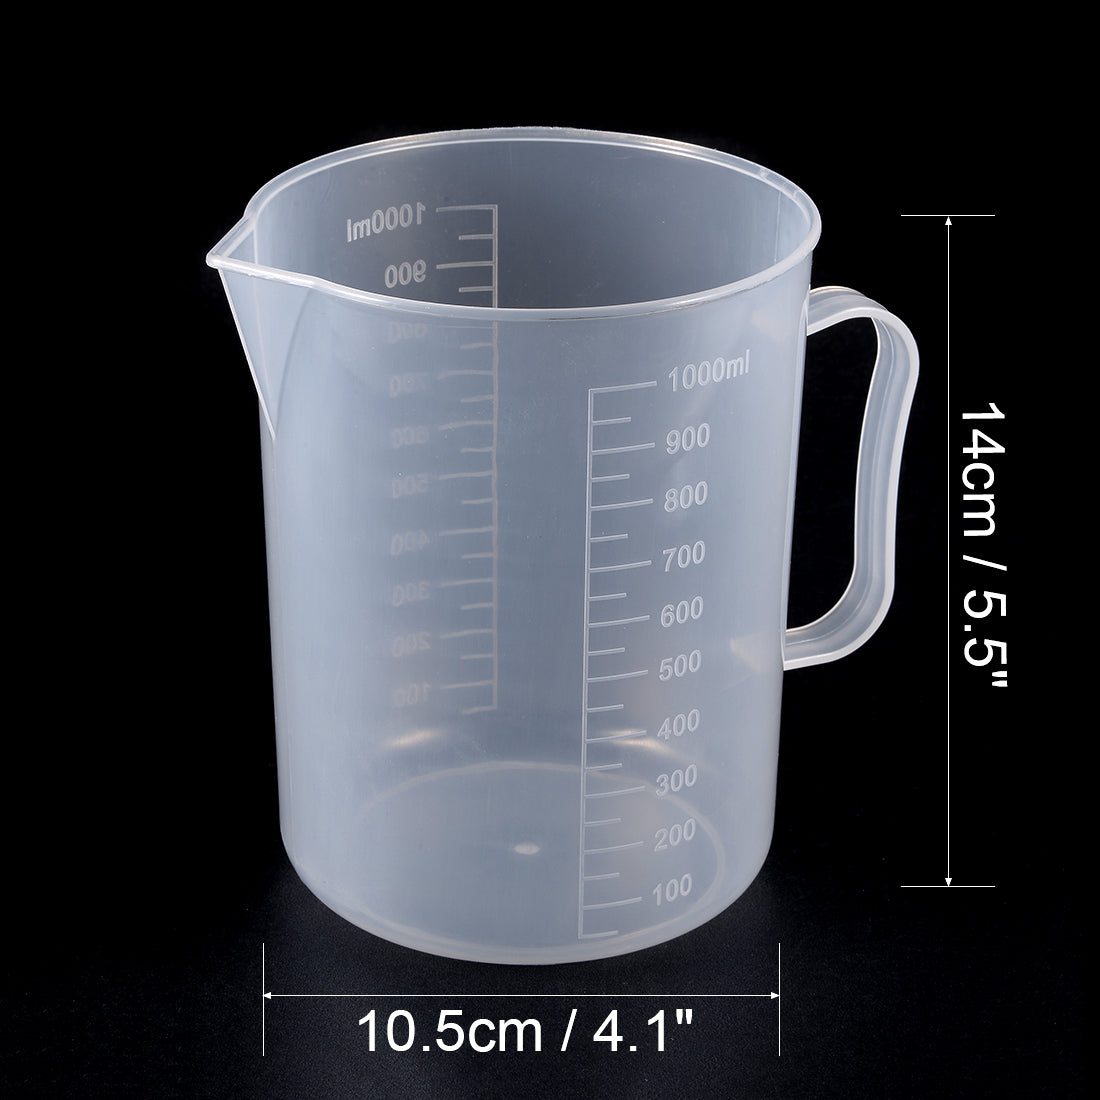 uxcell Uxcell Laboratory Clear White PP 1000mL Measuring Cup Handled Beaker